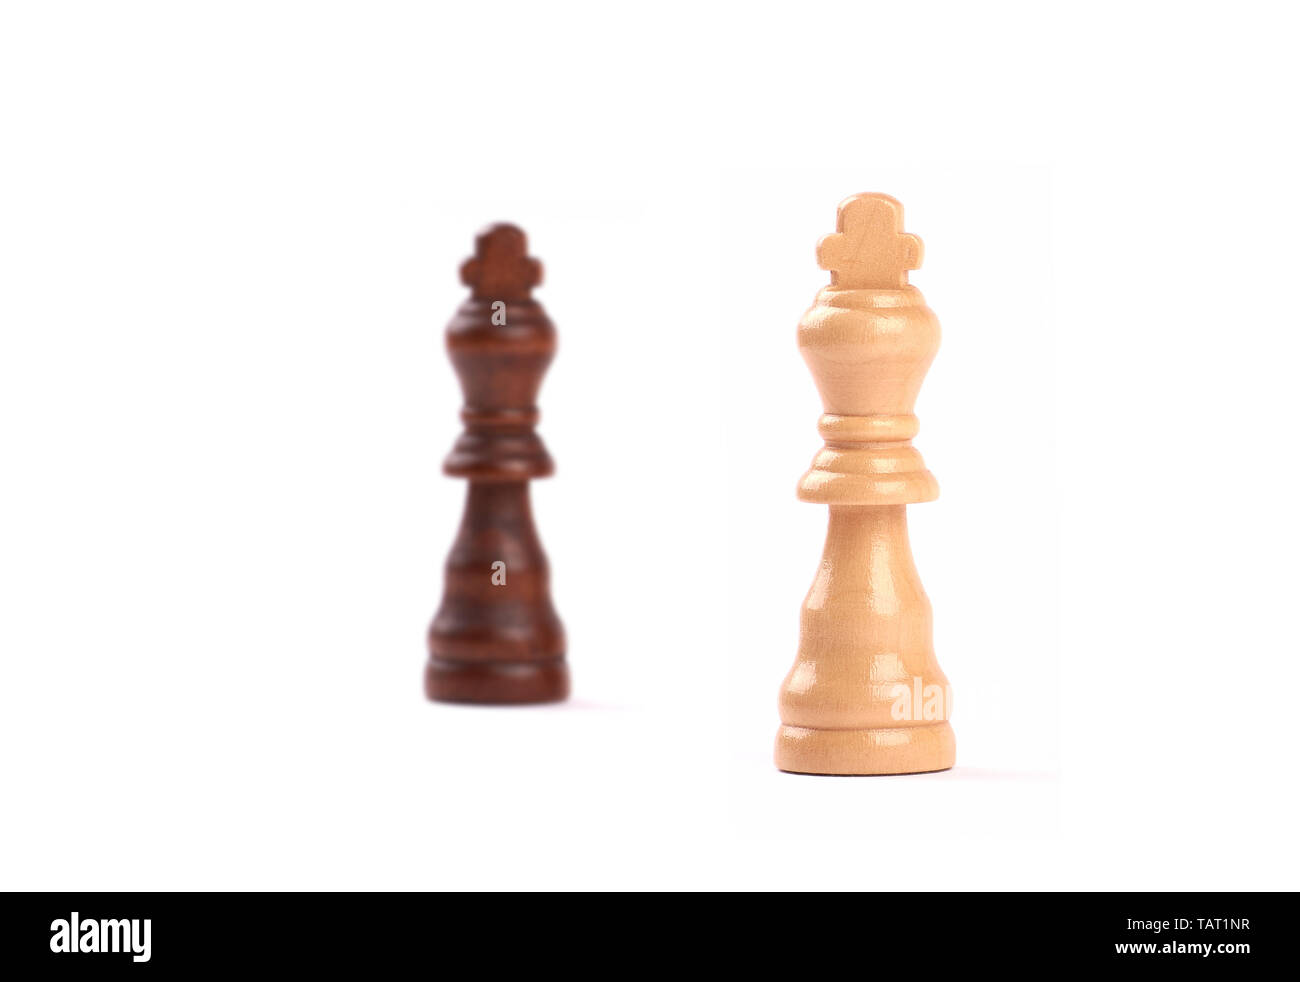 Two chess pieces. Black and white king of wood with blurred background. Isolated on white. Stock Photo